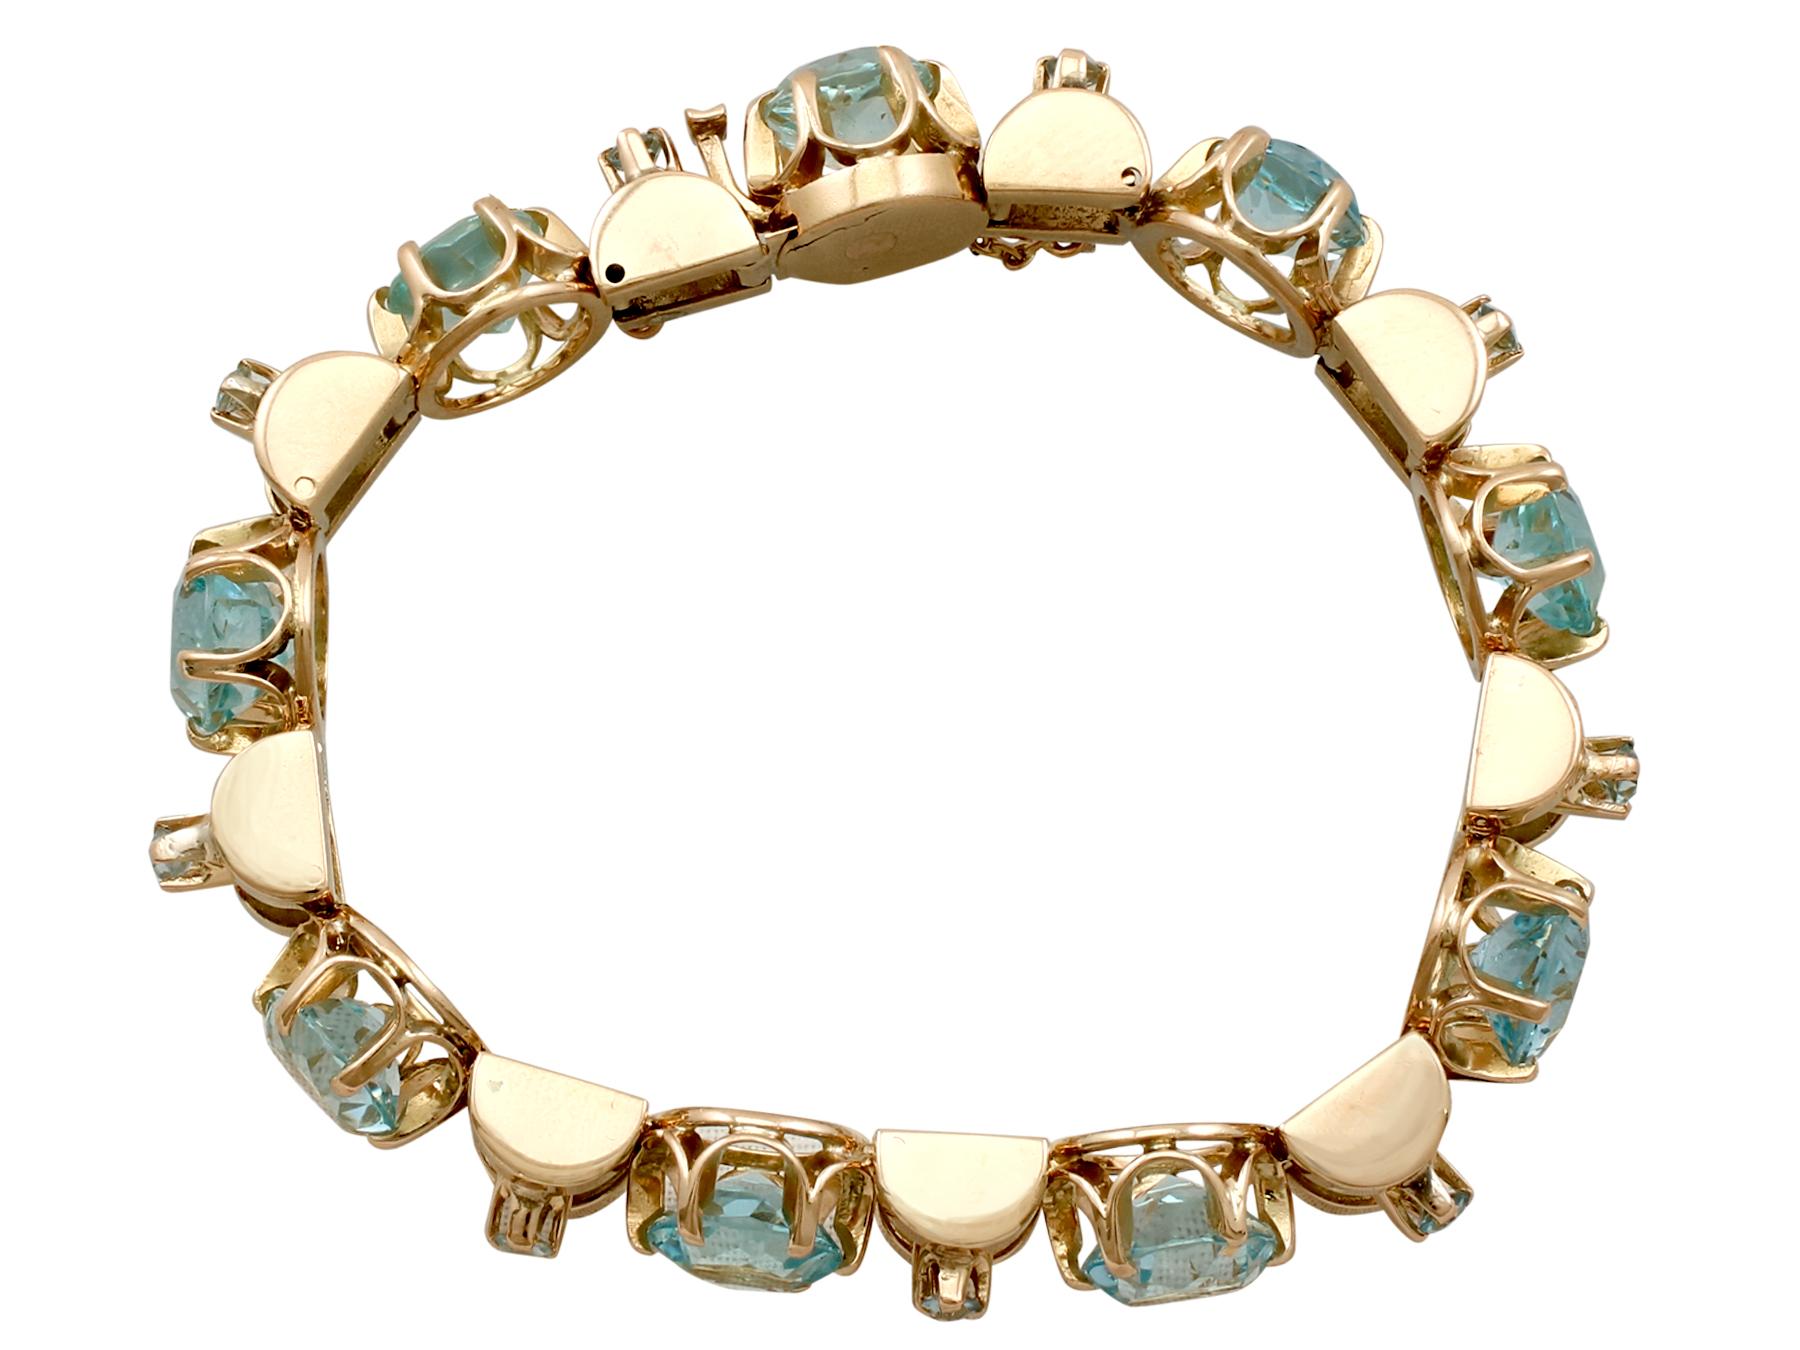 An impressive antique Art Deco 18.18 carat aquamarine and 15 karat yellow gold bracelet; part of our diverse antique jewelry and estate jewelry collections.

This fine and impressive antique aquamarine bracelet has been crafted in 15k yellow